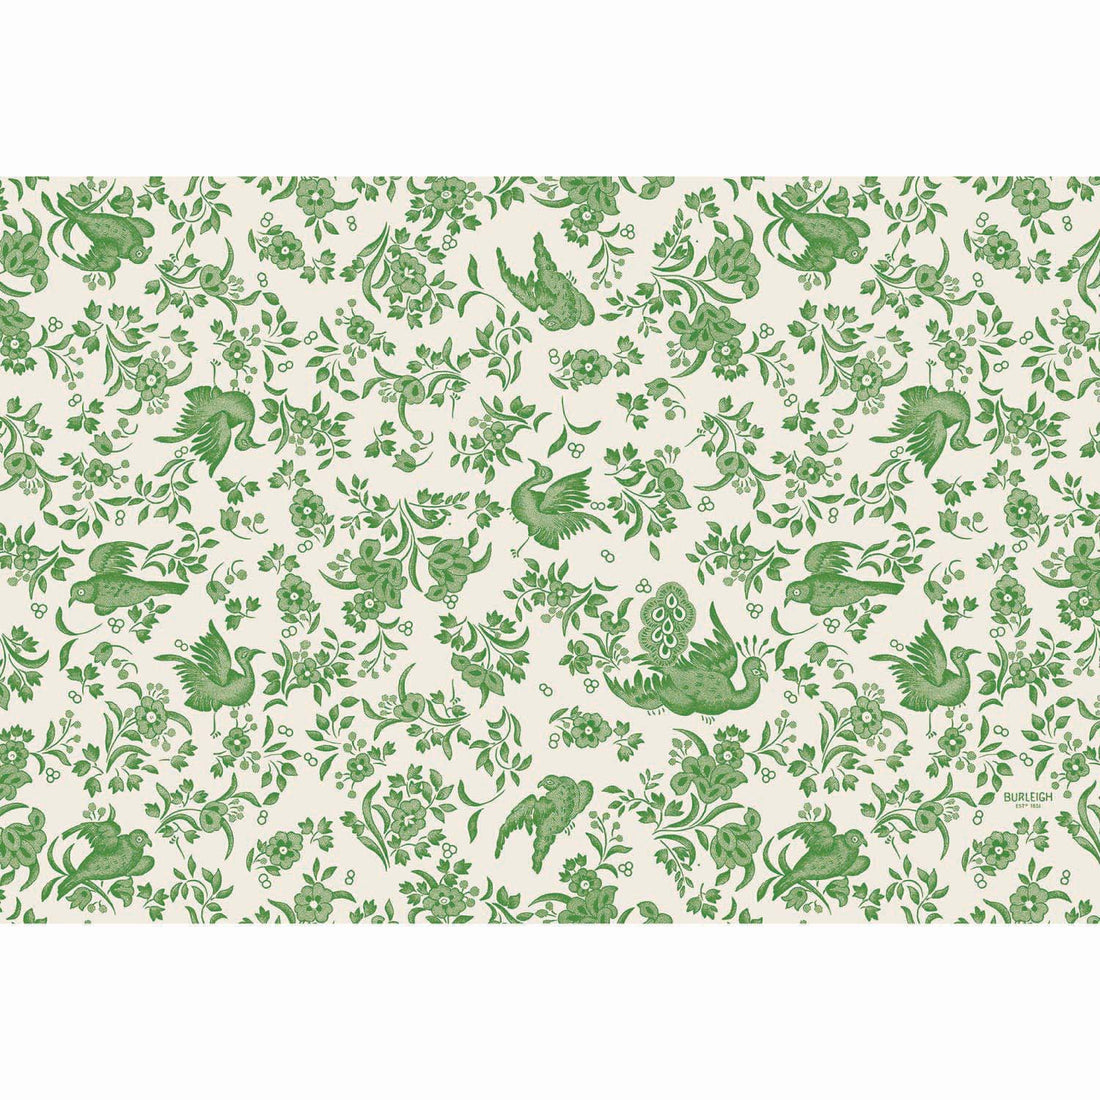 A Green Regal Peacock Paper Placemat from Hester &amp; Cook, featuring a green bird and floral pattern on a white background, inspired by the ornamental bird pattern from Burleigh.